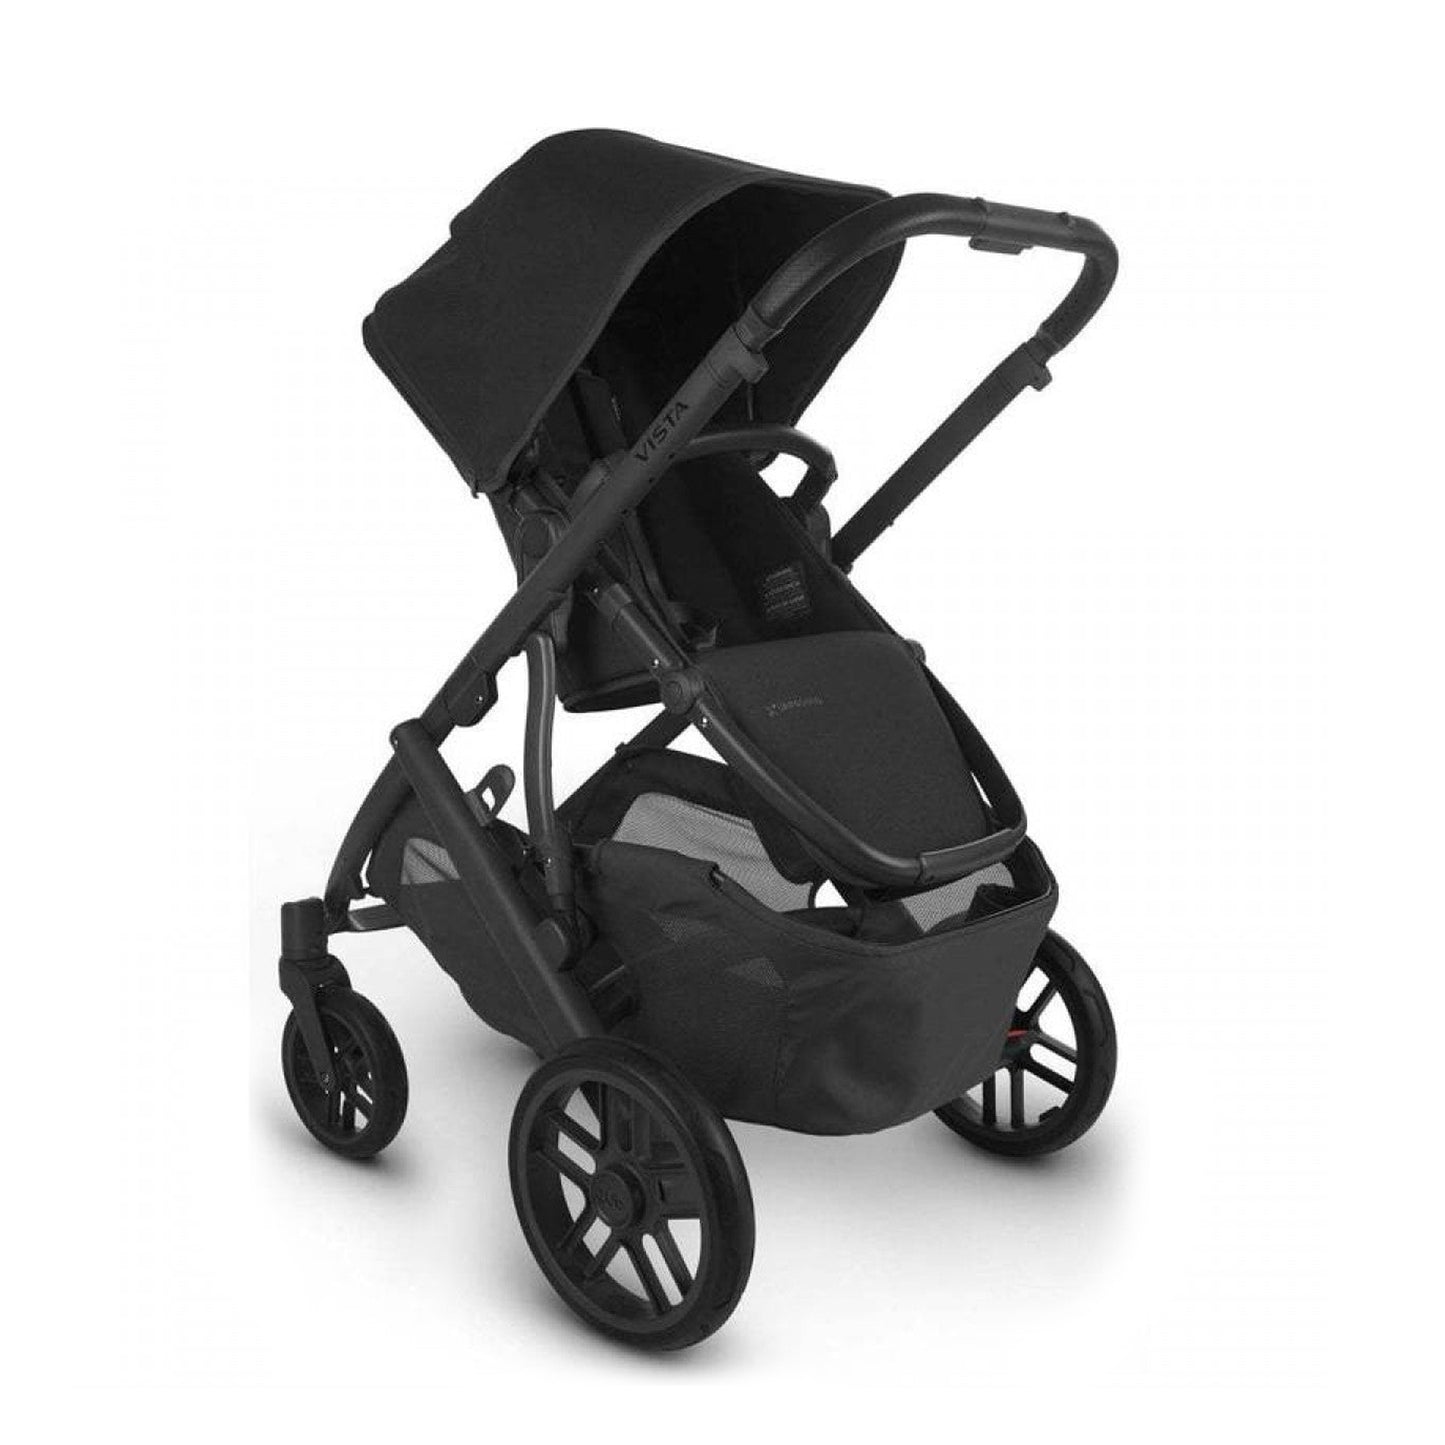 UPPAbaby VISTA V2 Stroller with UPPAbaby Rumble Seat Bundle